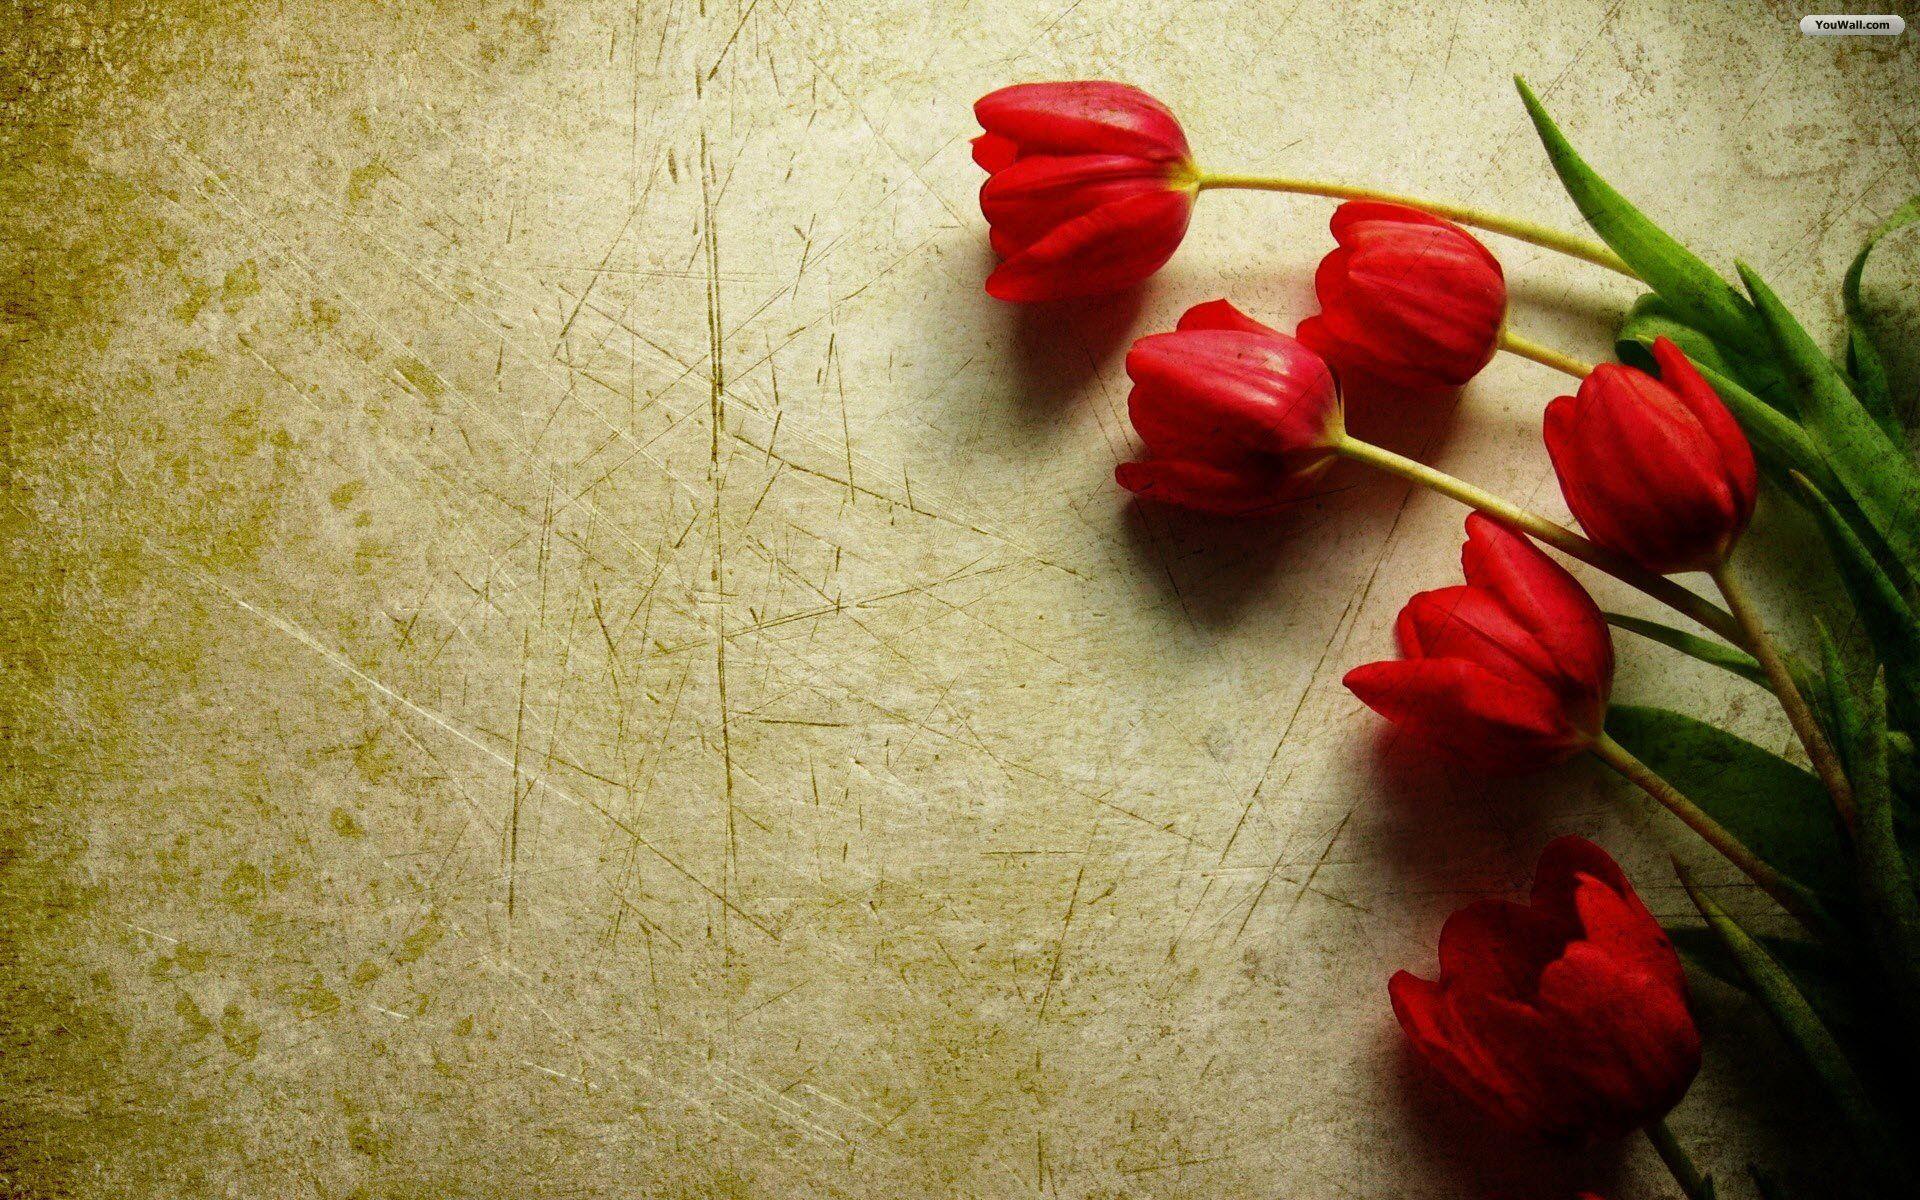 Red Tulips Wallpaper Rainbow Wallpaper. Red tulips